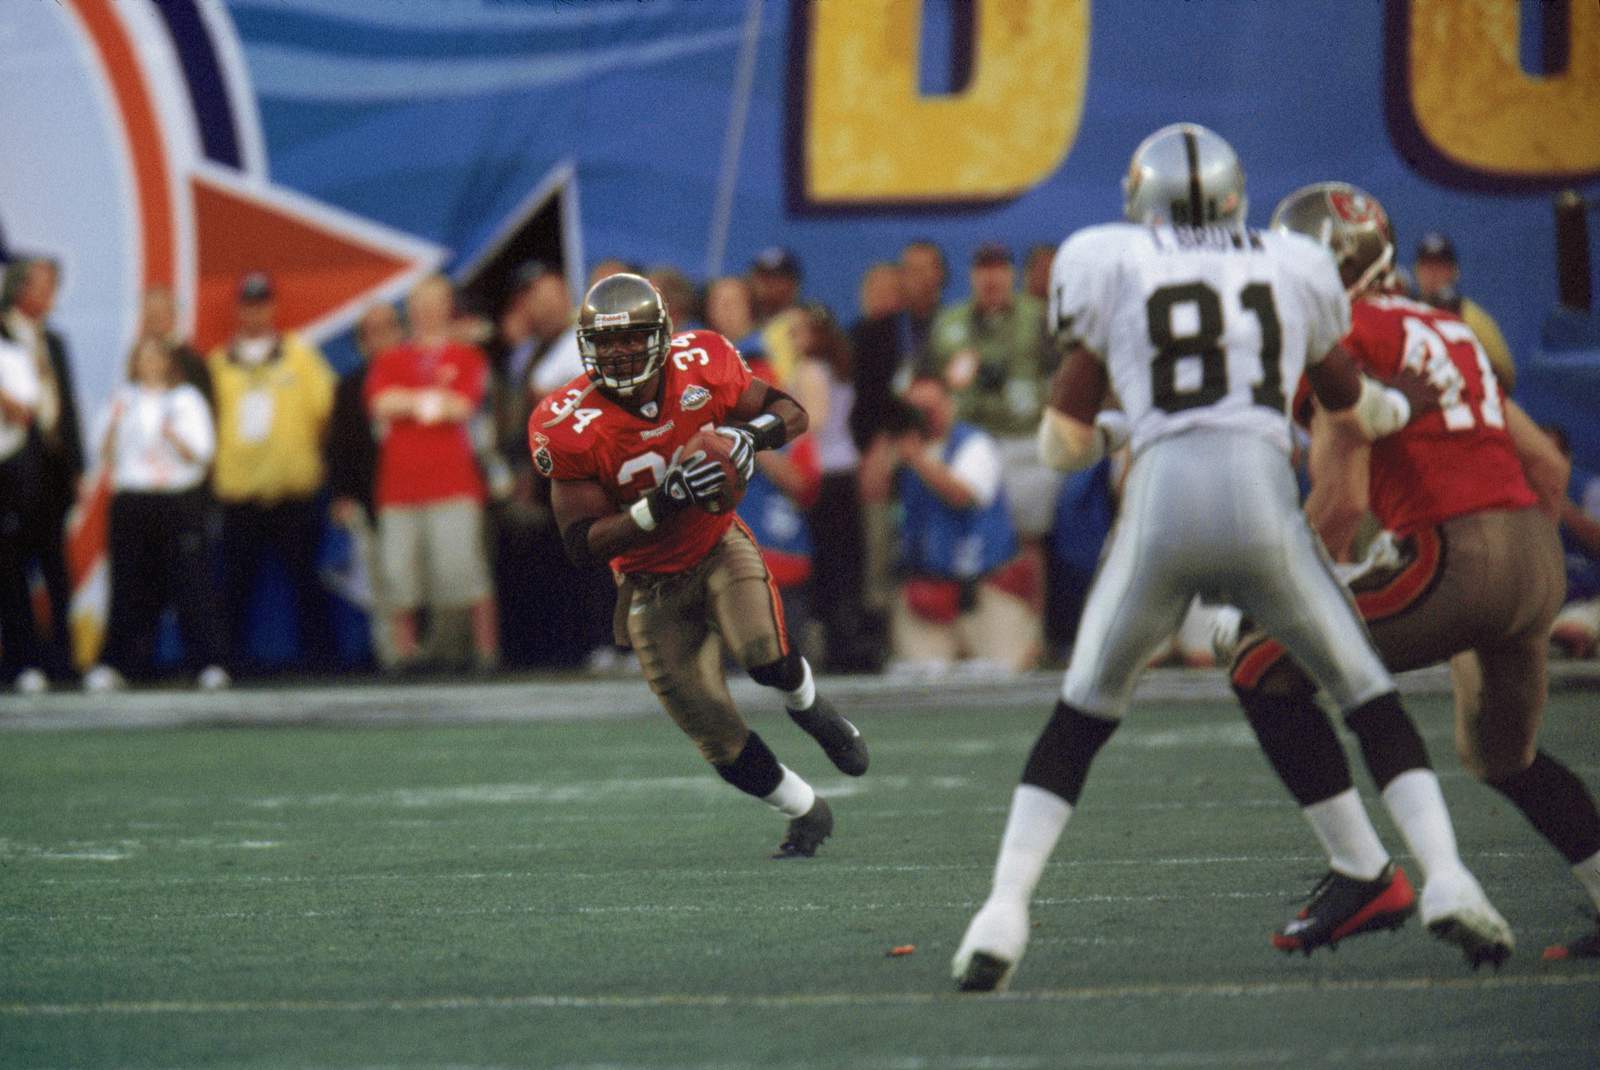 Relive Tampa Bay’s first Super Bowl win 18 years later